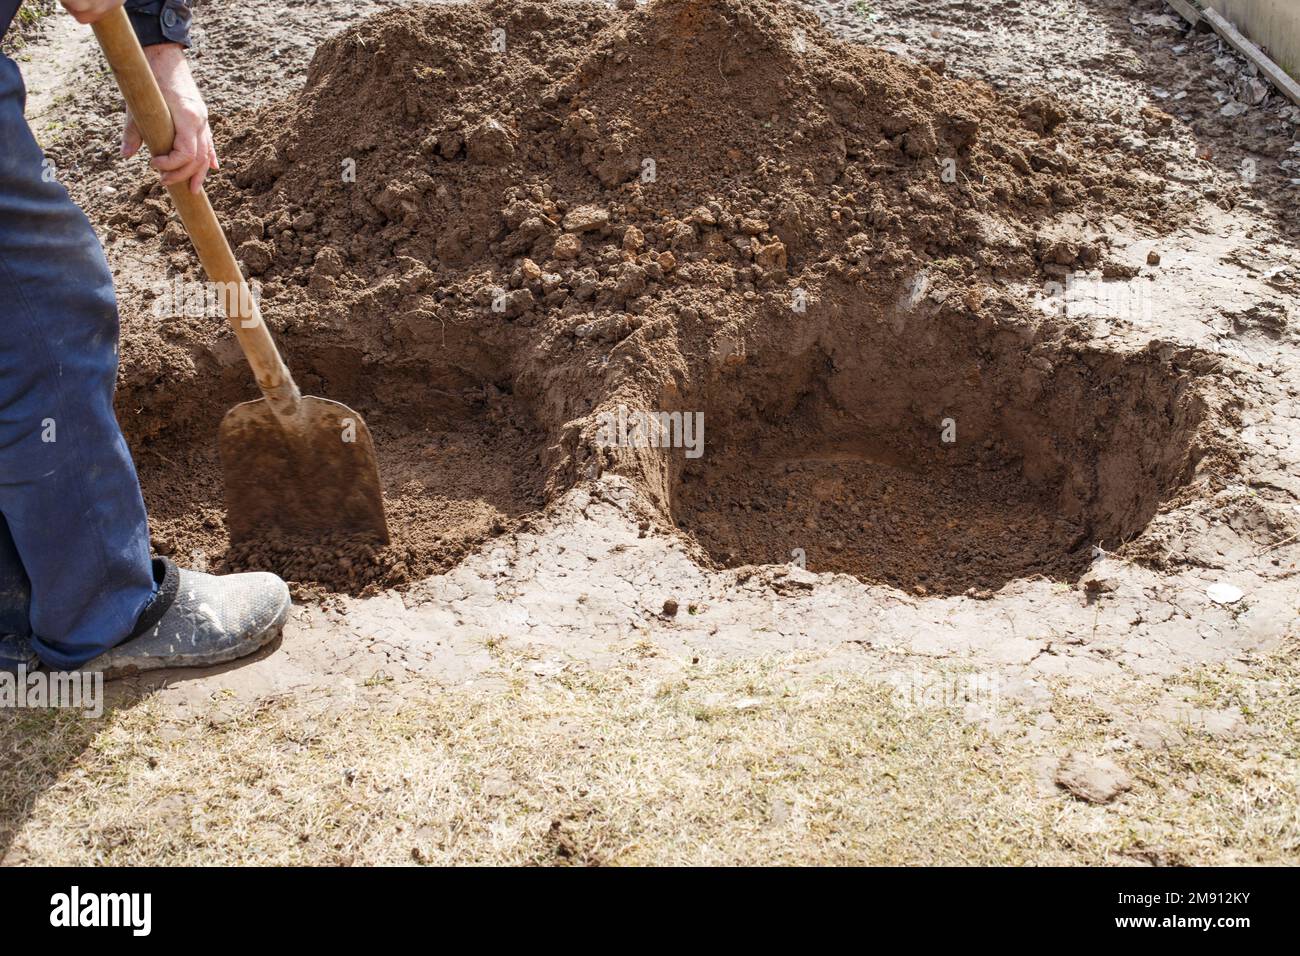 man digging a hole for planting a fruit tree in the garden. Stock Photo